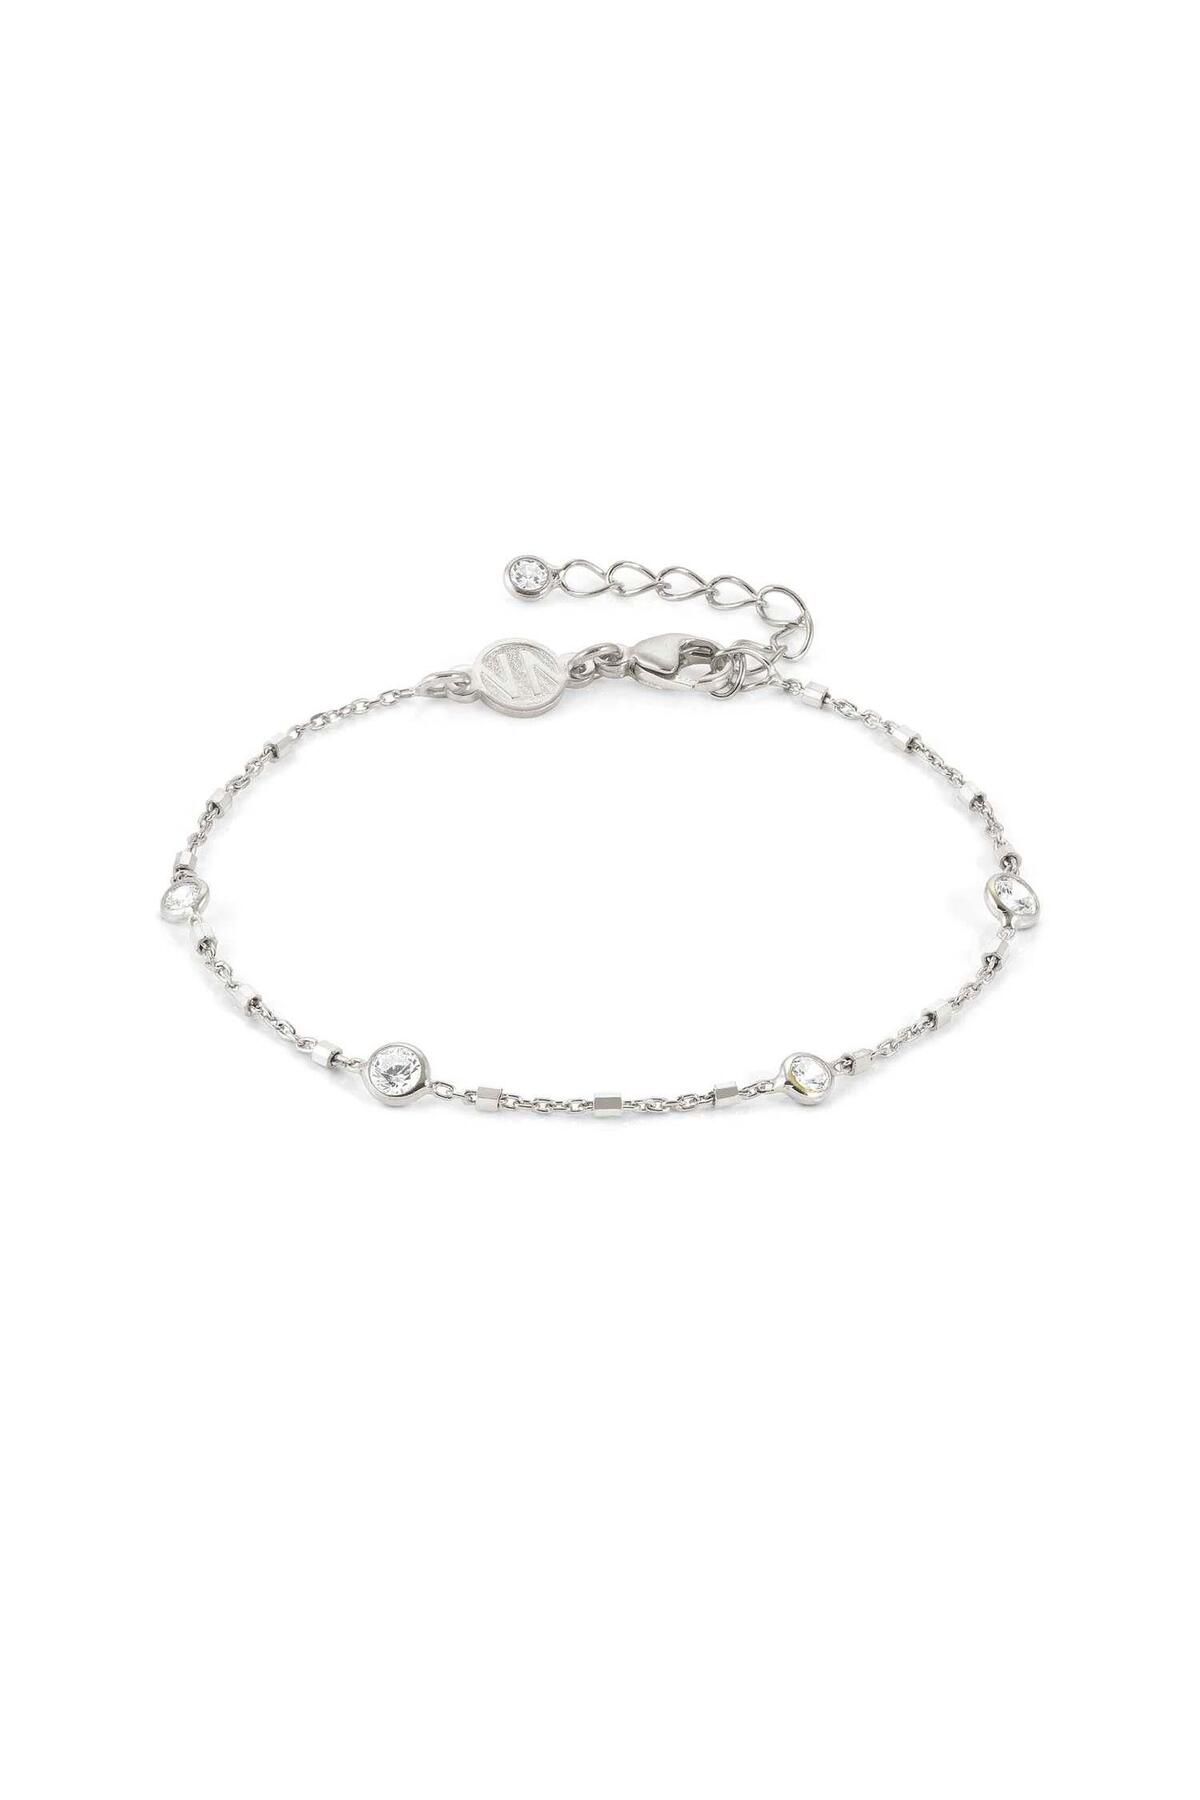 NOMİNATİON Bella Bracelet Ed, Detaıls In 925 Silver And Cz (034_mixed Chain)